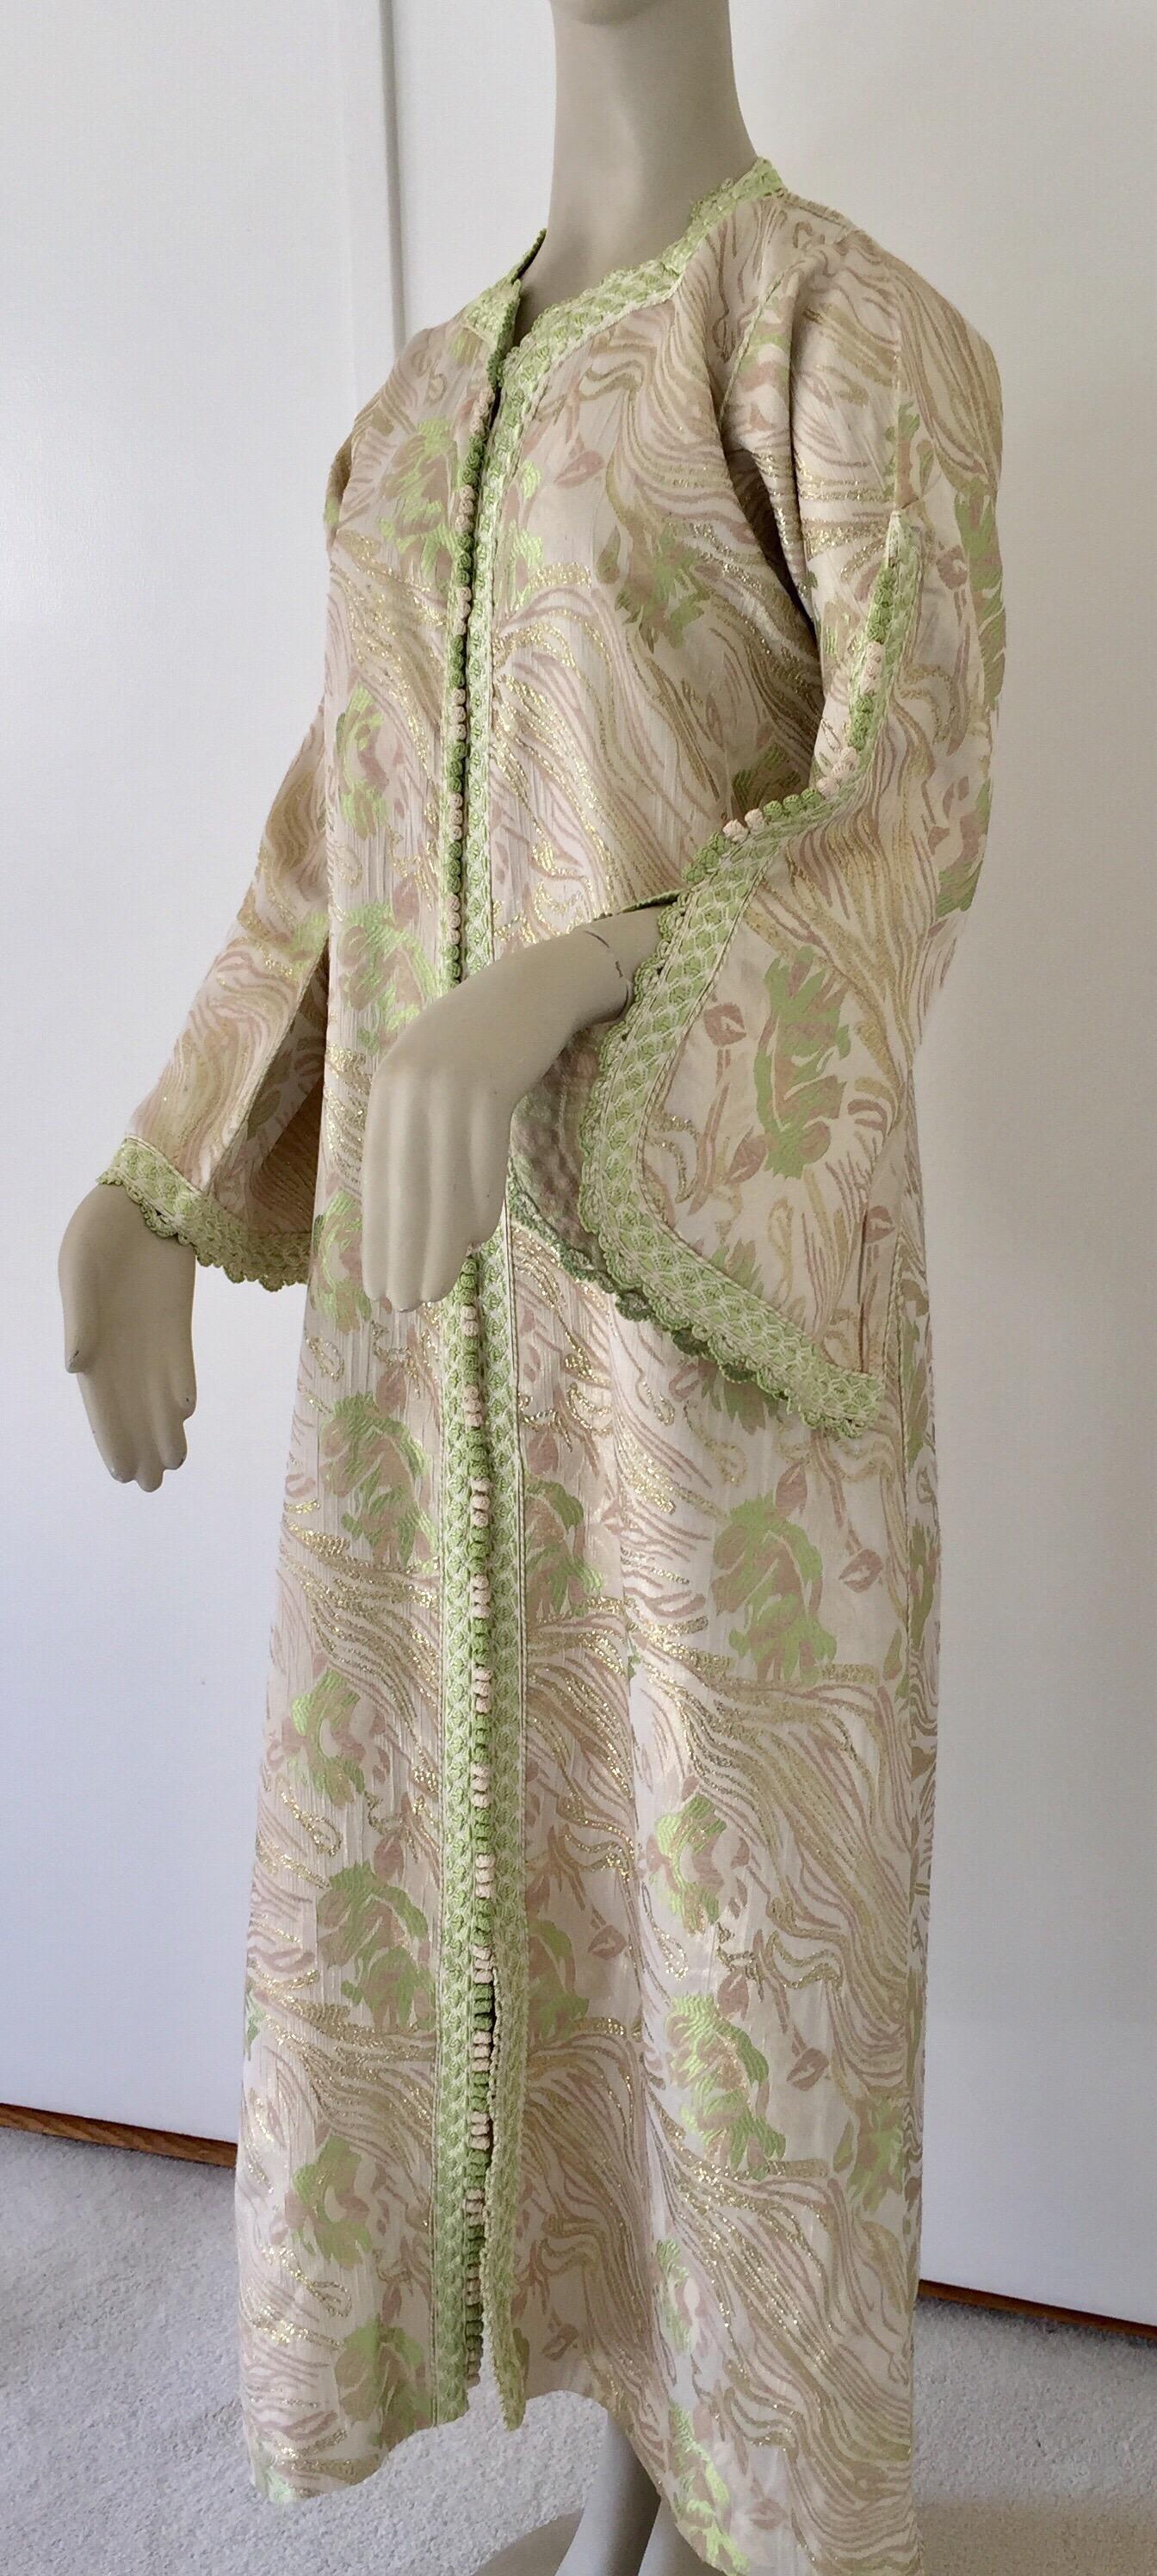 Moroccan Caftan Lime Green and Silver Metallic Floral Brocade Moorish Kaftan In Good Condition For Sale In North Hollywood, CA